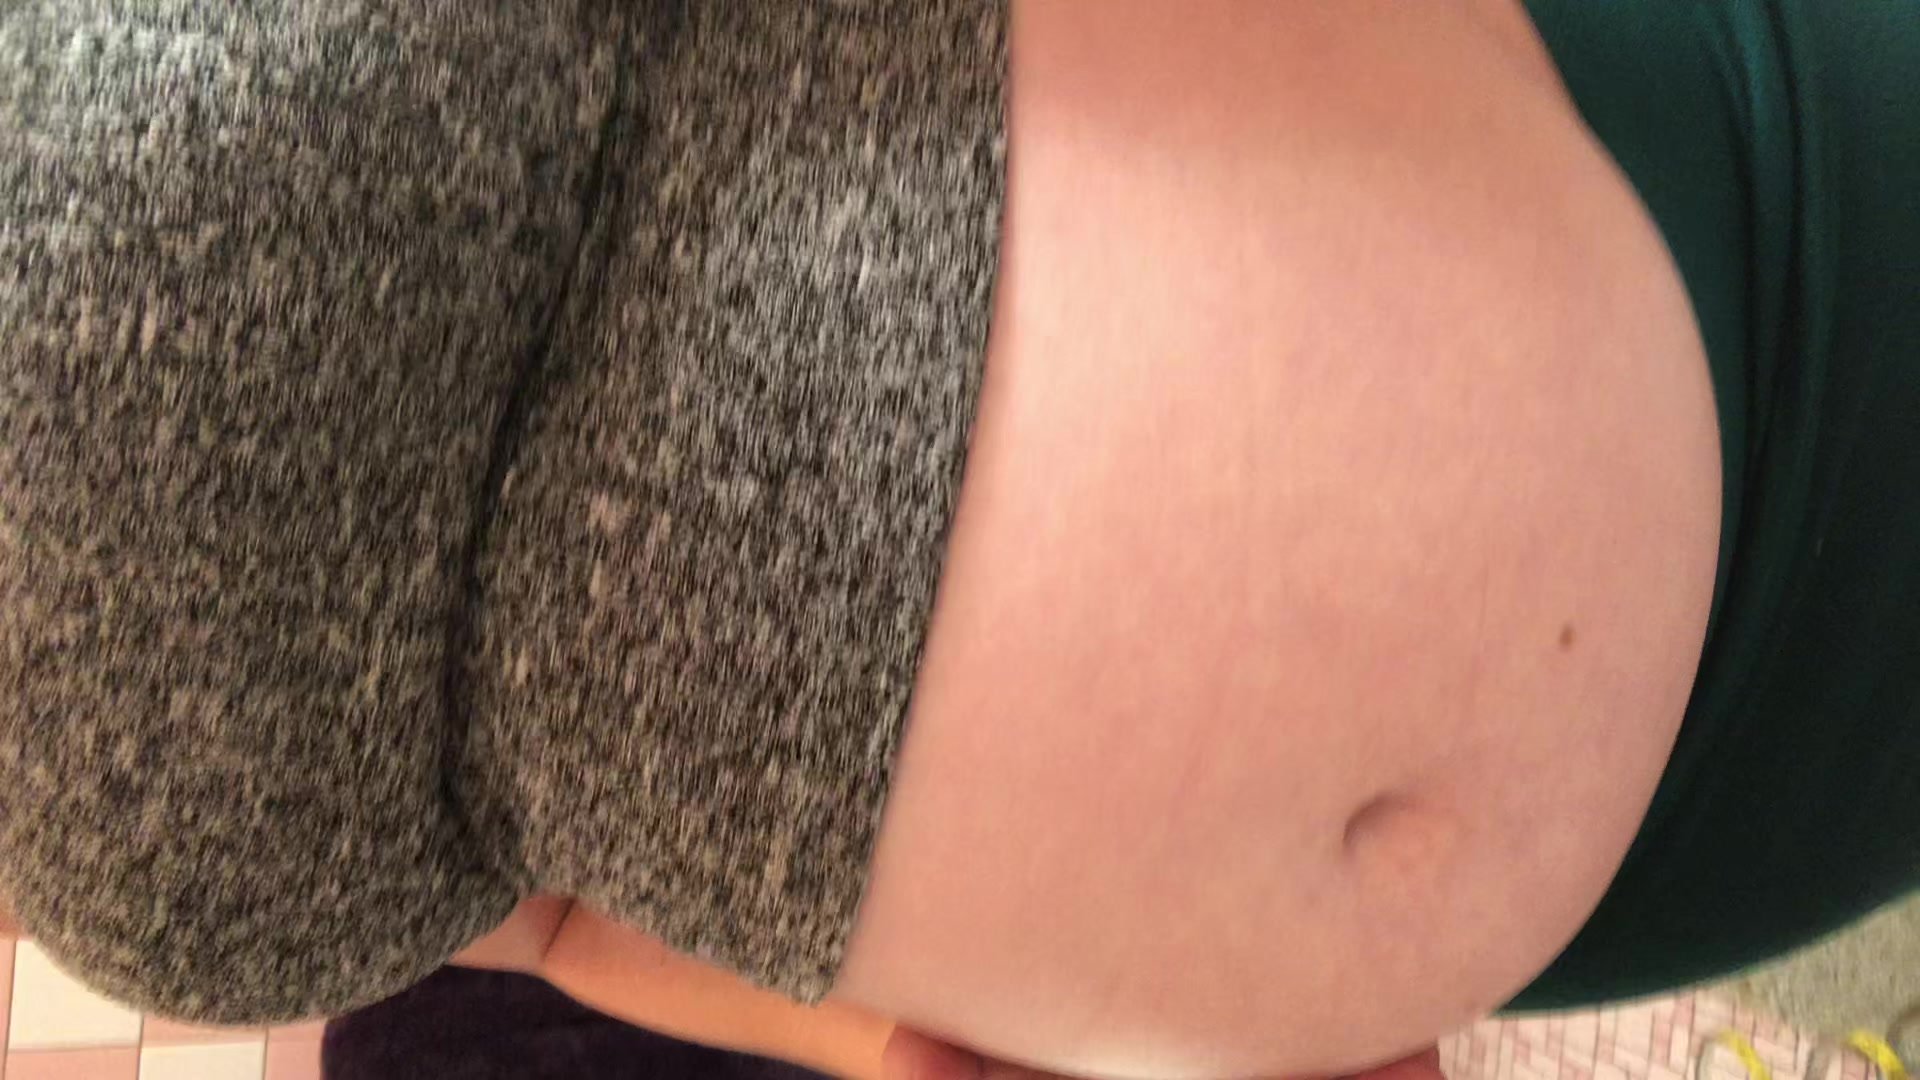 bloated belly - video 679